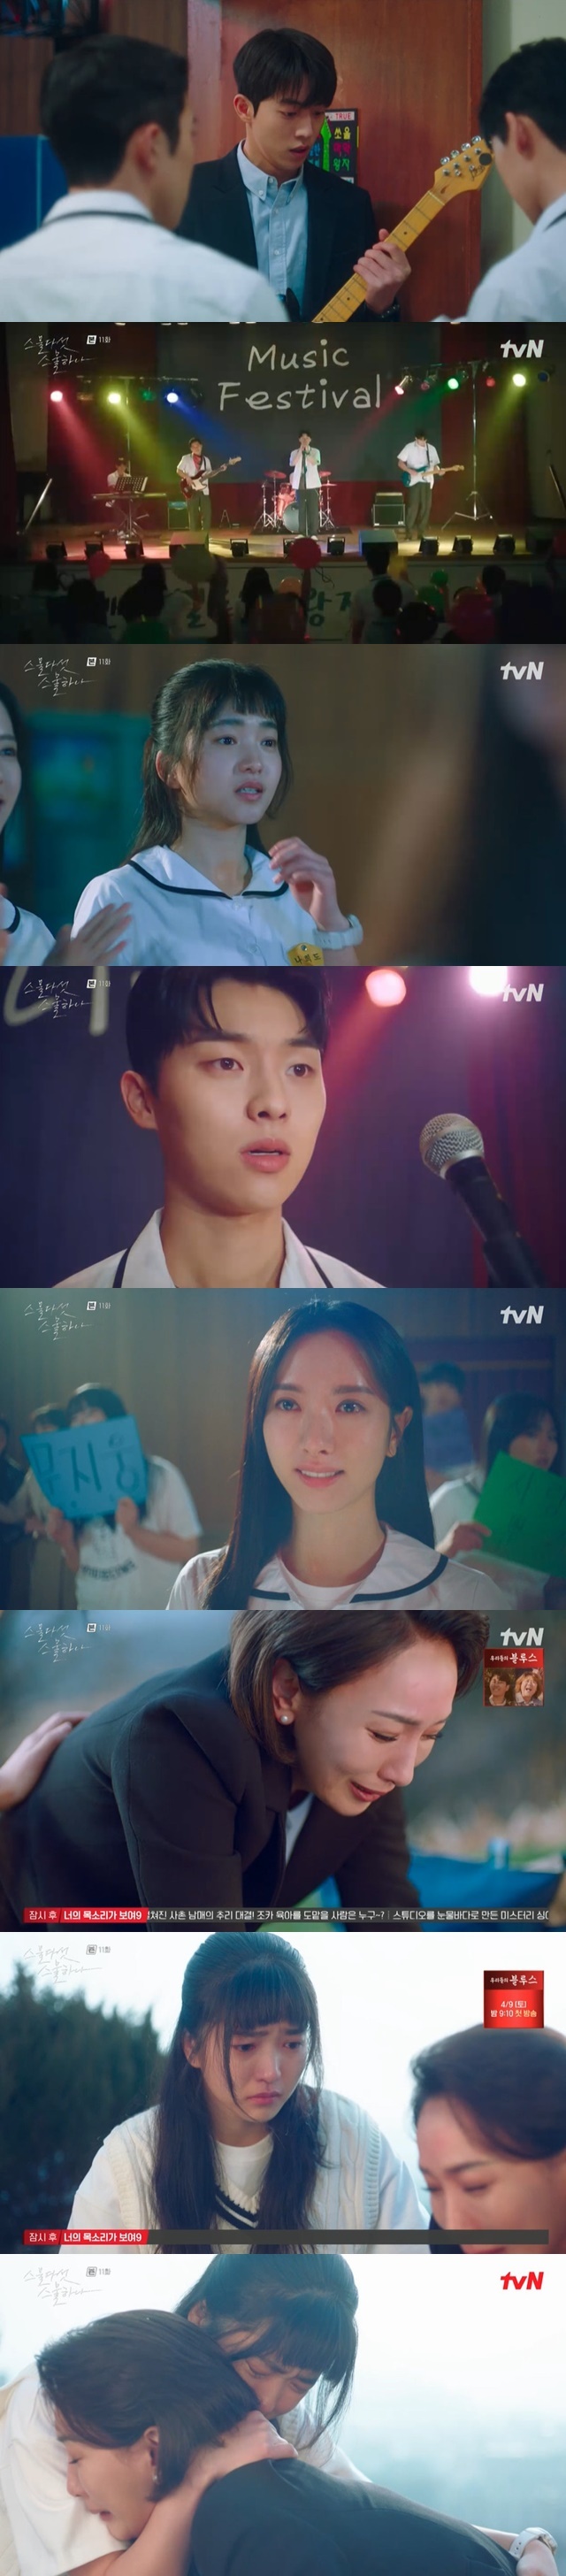 Bona and Choi Hyun-wook started dating, and Kim Tae-ri reconciled her tears with her mother, Jae Hee.In the 11th episode of TVNs Saturday Drama Twenty Five Twinty Hana (playplayed by Kwon Do-eun/directed by Jung Ji-hyun), which aired on March 19, the conflict between Na Hee-do (played by Kim Tae-ri) and her mother, Shin Jae-kyung (played by Seo Jae-hee) exploded.Moon Ji-woong (Choi Hyun-wook) tried to confessions to the late Yu Rim (Bona Boone) on the day the band performed, but suddenly fencing battery training was caught.I dont think I can go to the show, the late Yu Rim apologized to Moon.Na Hee-do (Kim Tae-ri) suggested to his mother, Shin Jae-kyung (Seo Jae-kyung), to fix the chair made by his dead father, and marked his fathers anniversary on his calendar.Na Hee-do became a close friend of Yu Rim and asked, Why did you do it to me at first when you are such a sweet child?I was afraid of you, said Yu Rim, who told Na Hee-do that he lost 8:0 to the boy.Ko Yu Rim trained hard to beat Na Hee-do, but after seeing Na Hee-do, who had been poorly performing, said he was angry and said that Na Hee-do was still tear.Shin Jae-kyung tried to return home for the promise to fix the chair with Na Hee-do while having a dinner, but broke his promise because of the breaking news that he had caught Shin Chang-won.Lee Jin said, It is wonderful when he saw Shin Jae-kyung, who reported professional news even after drinking alcohol, but Na Hee-do exploded to Shin Jae-kyung, saying, I am still 13 years old, pinching what he did not come to his fathers funeral because of past breaking news.Shin Jae-kyung told her daughter Na Hee-do, You may have nostalgia for your father, but I am 80,000 resentment.Na Hee-do then encountered Lee Jin while looking for an abandoned chair and burst into tears, saying, My mother threw away the Father chair.You were cool that day, said Lee Jin, who was looking for a chair and couldnt find it. Its strange that your wounds always follow your professional spirit.Na Hee-do heard the words of Lee Jin and saw his mother Shin Jae-kyung again.Moon complained to Lee Jin that he was trying to Confessions to the high Yu Rim on the band performance day, and Lee Jin took Na Hee Do and Go Yu Rim out of the battery training and took them to the performance.Moon Ji-woong did Confessions as planned and started dating Yu Rim.Back Lee Jin, in a daze, wore a uniform and played guitar at a performance, and reproduced a high school broadcast for Na Hee-do.